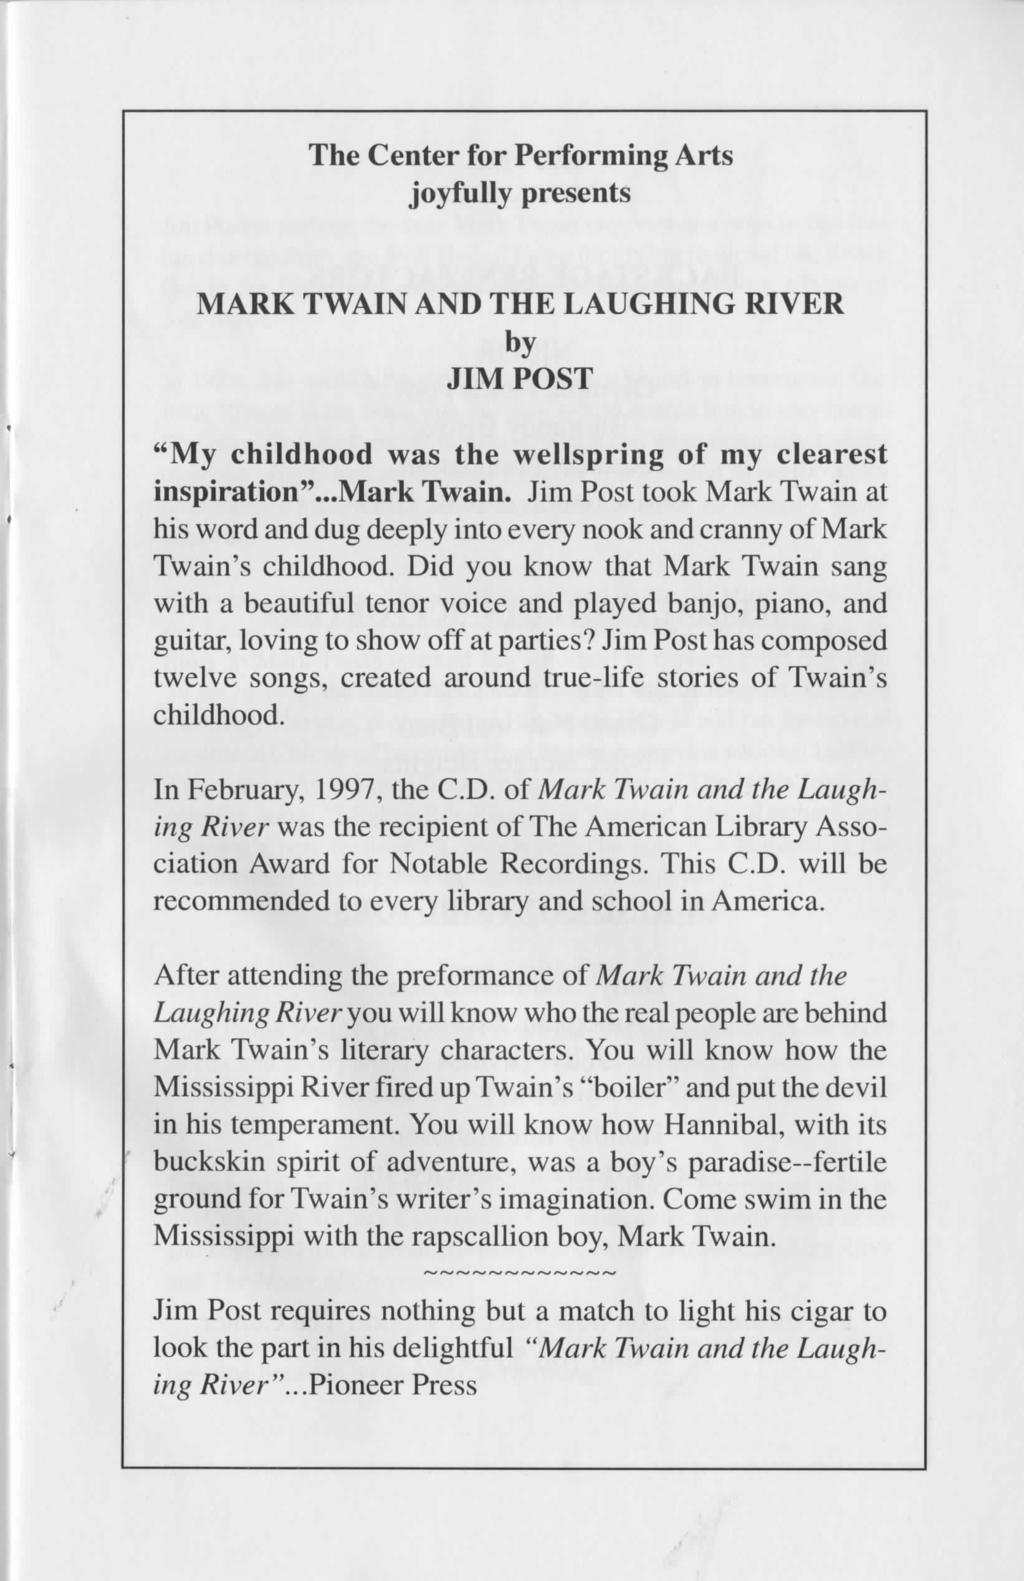 The Center for Performing Arts joyfully presents MARK TWAIN AND THE LAUGHING RIVER by JIM POST "My childhood was the wellspring of my clearest inspiration"...mark Twain.